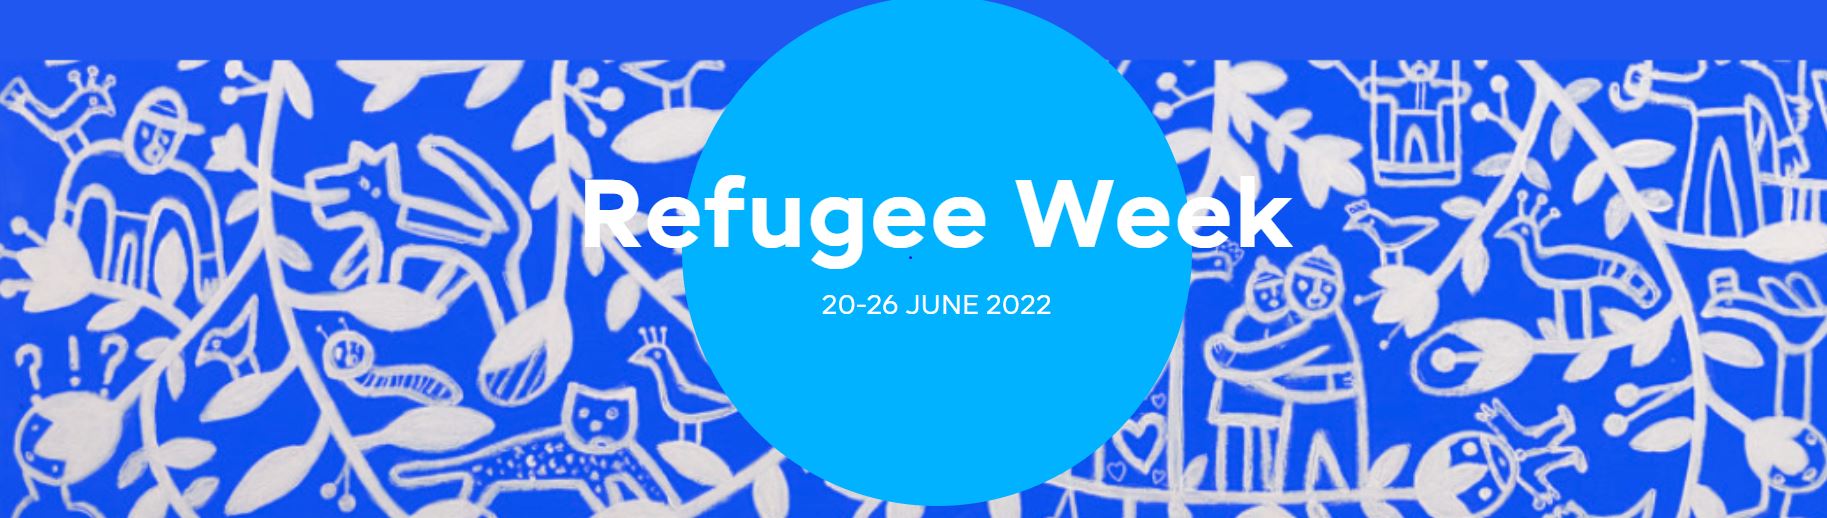 Refugee Week is a UK-wide festival celebrating the contributions, creativity and resilience of refugees and people seeking sanctuary. Founded in 1998 and held every year around World Refugee Day on […]